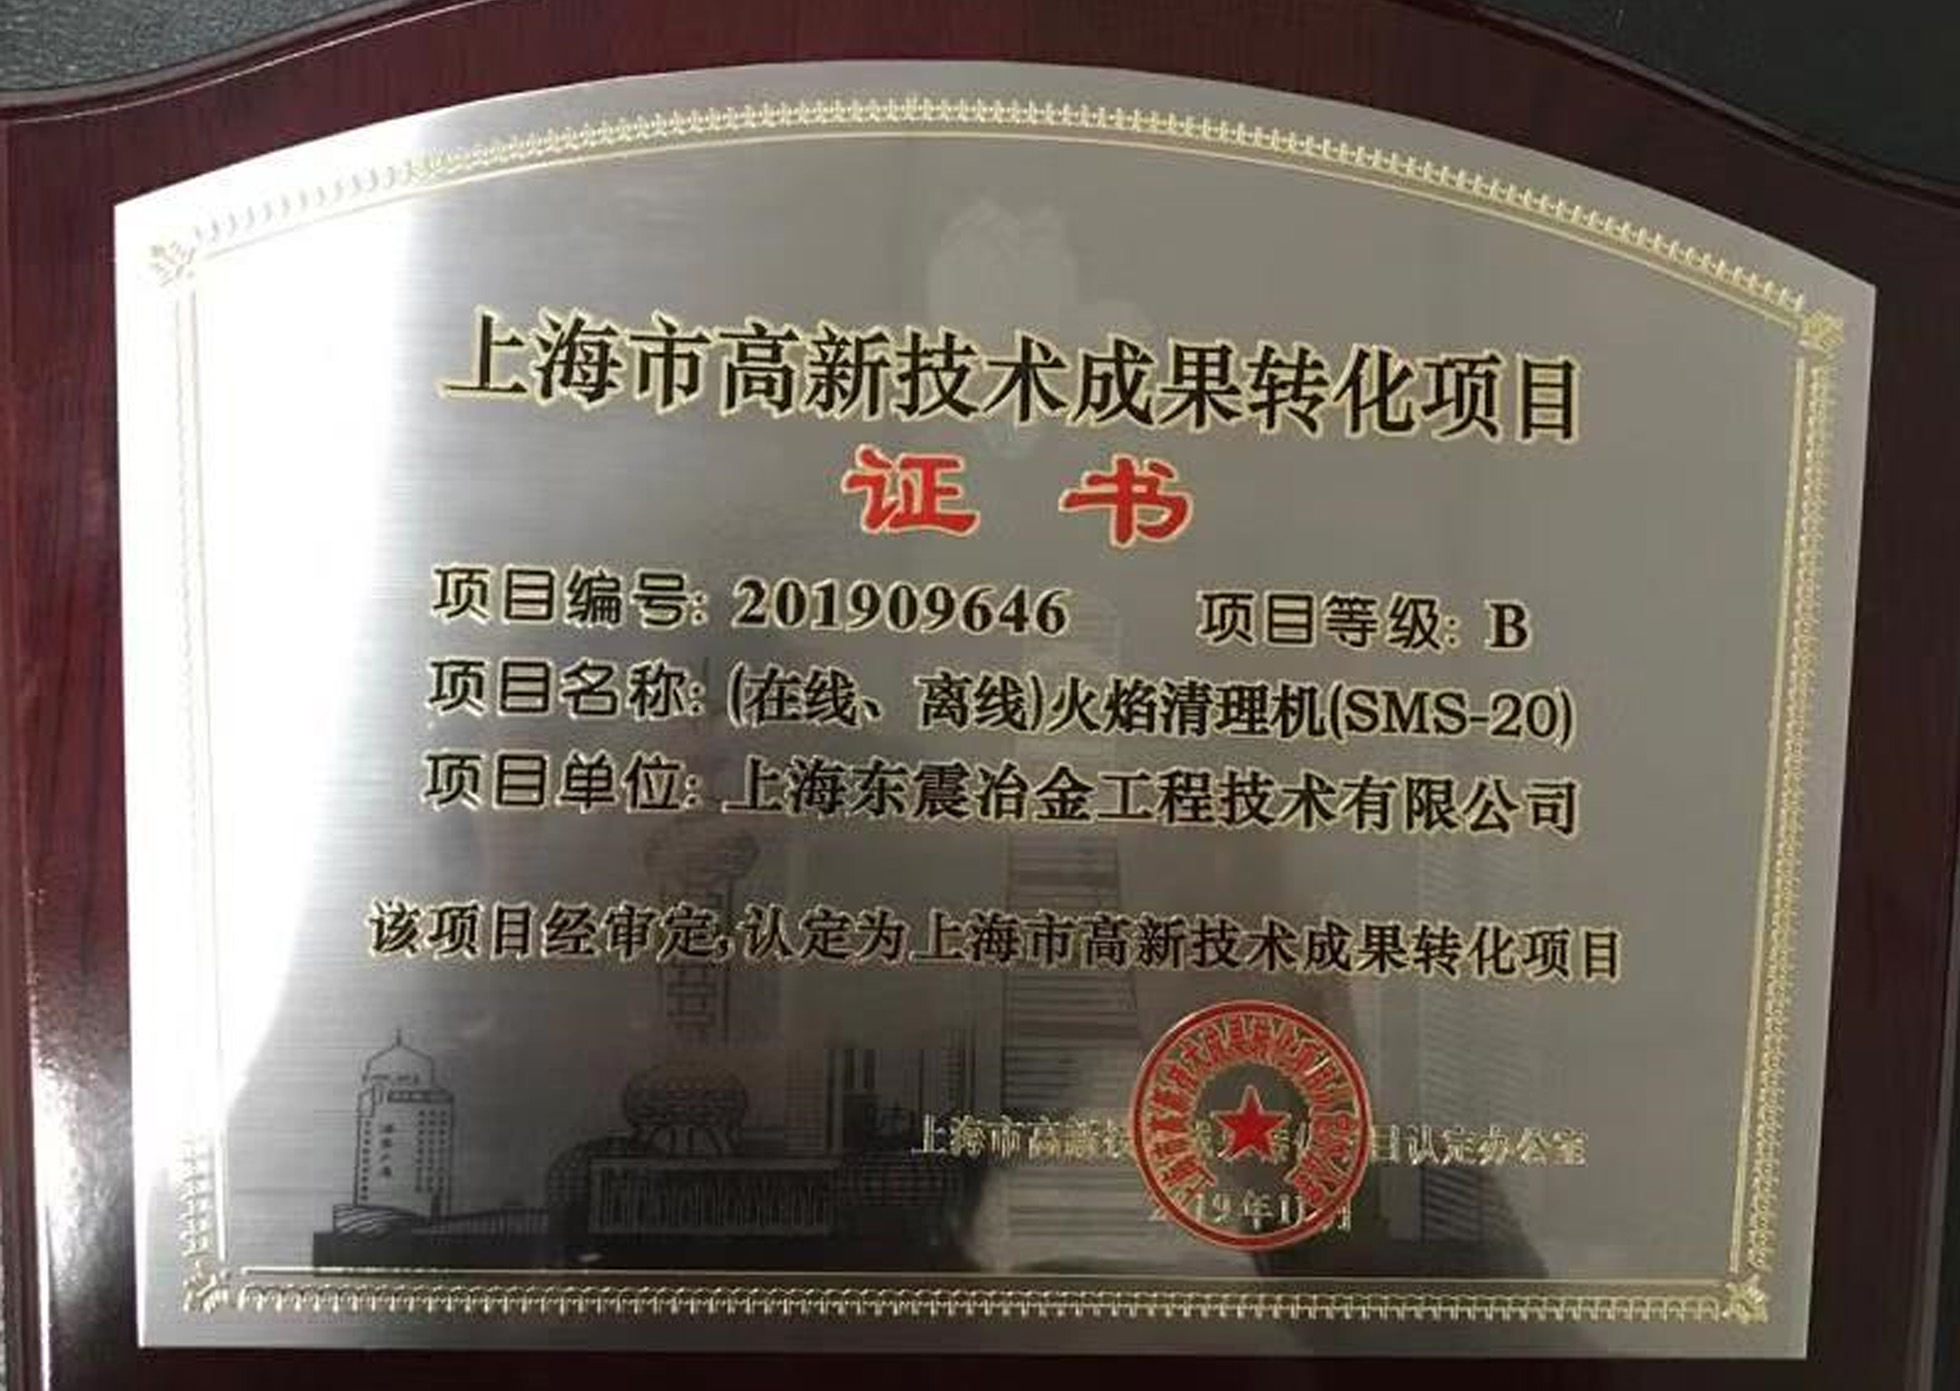 Certificate of Award for Transformation of High and New Technology Achievements